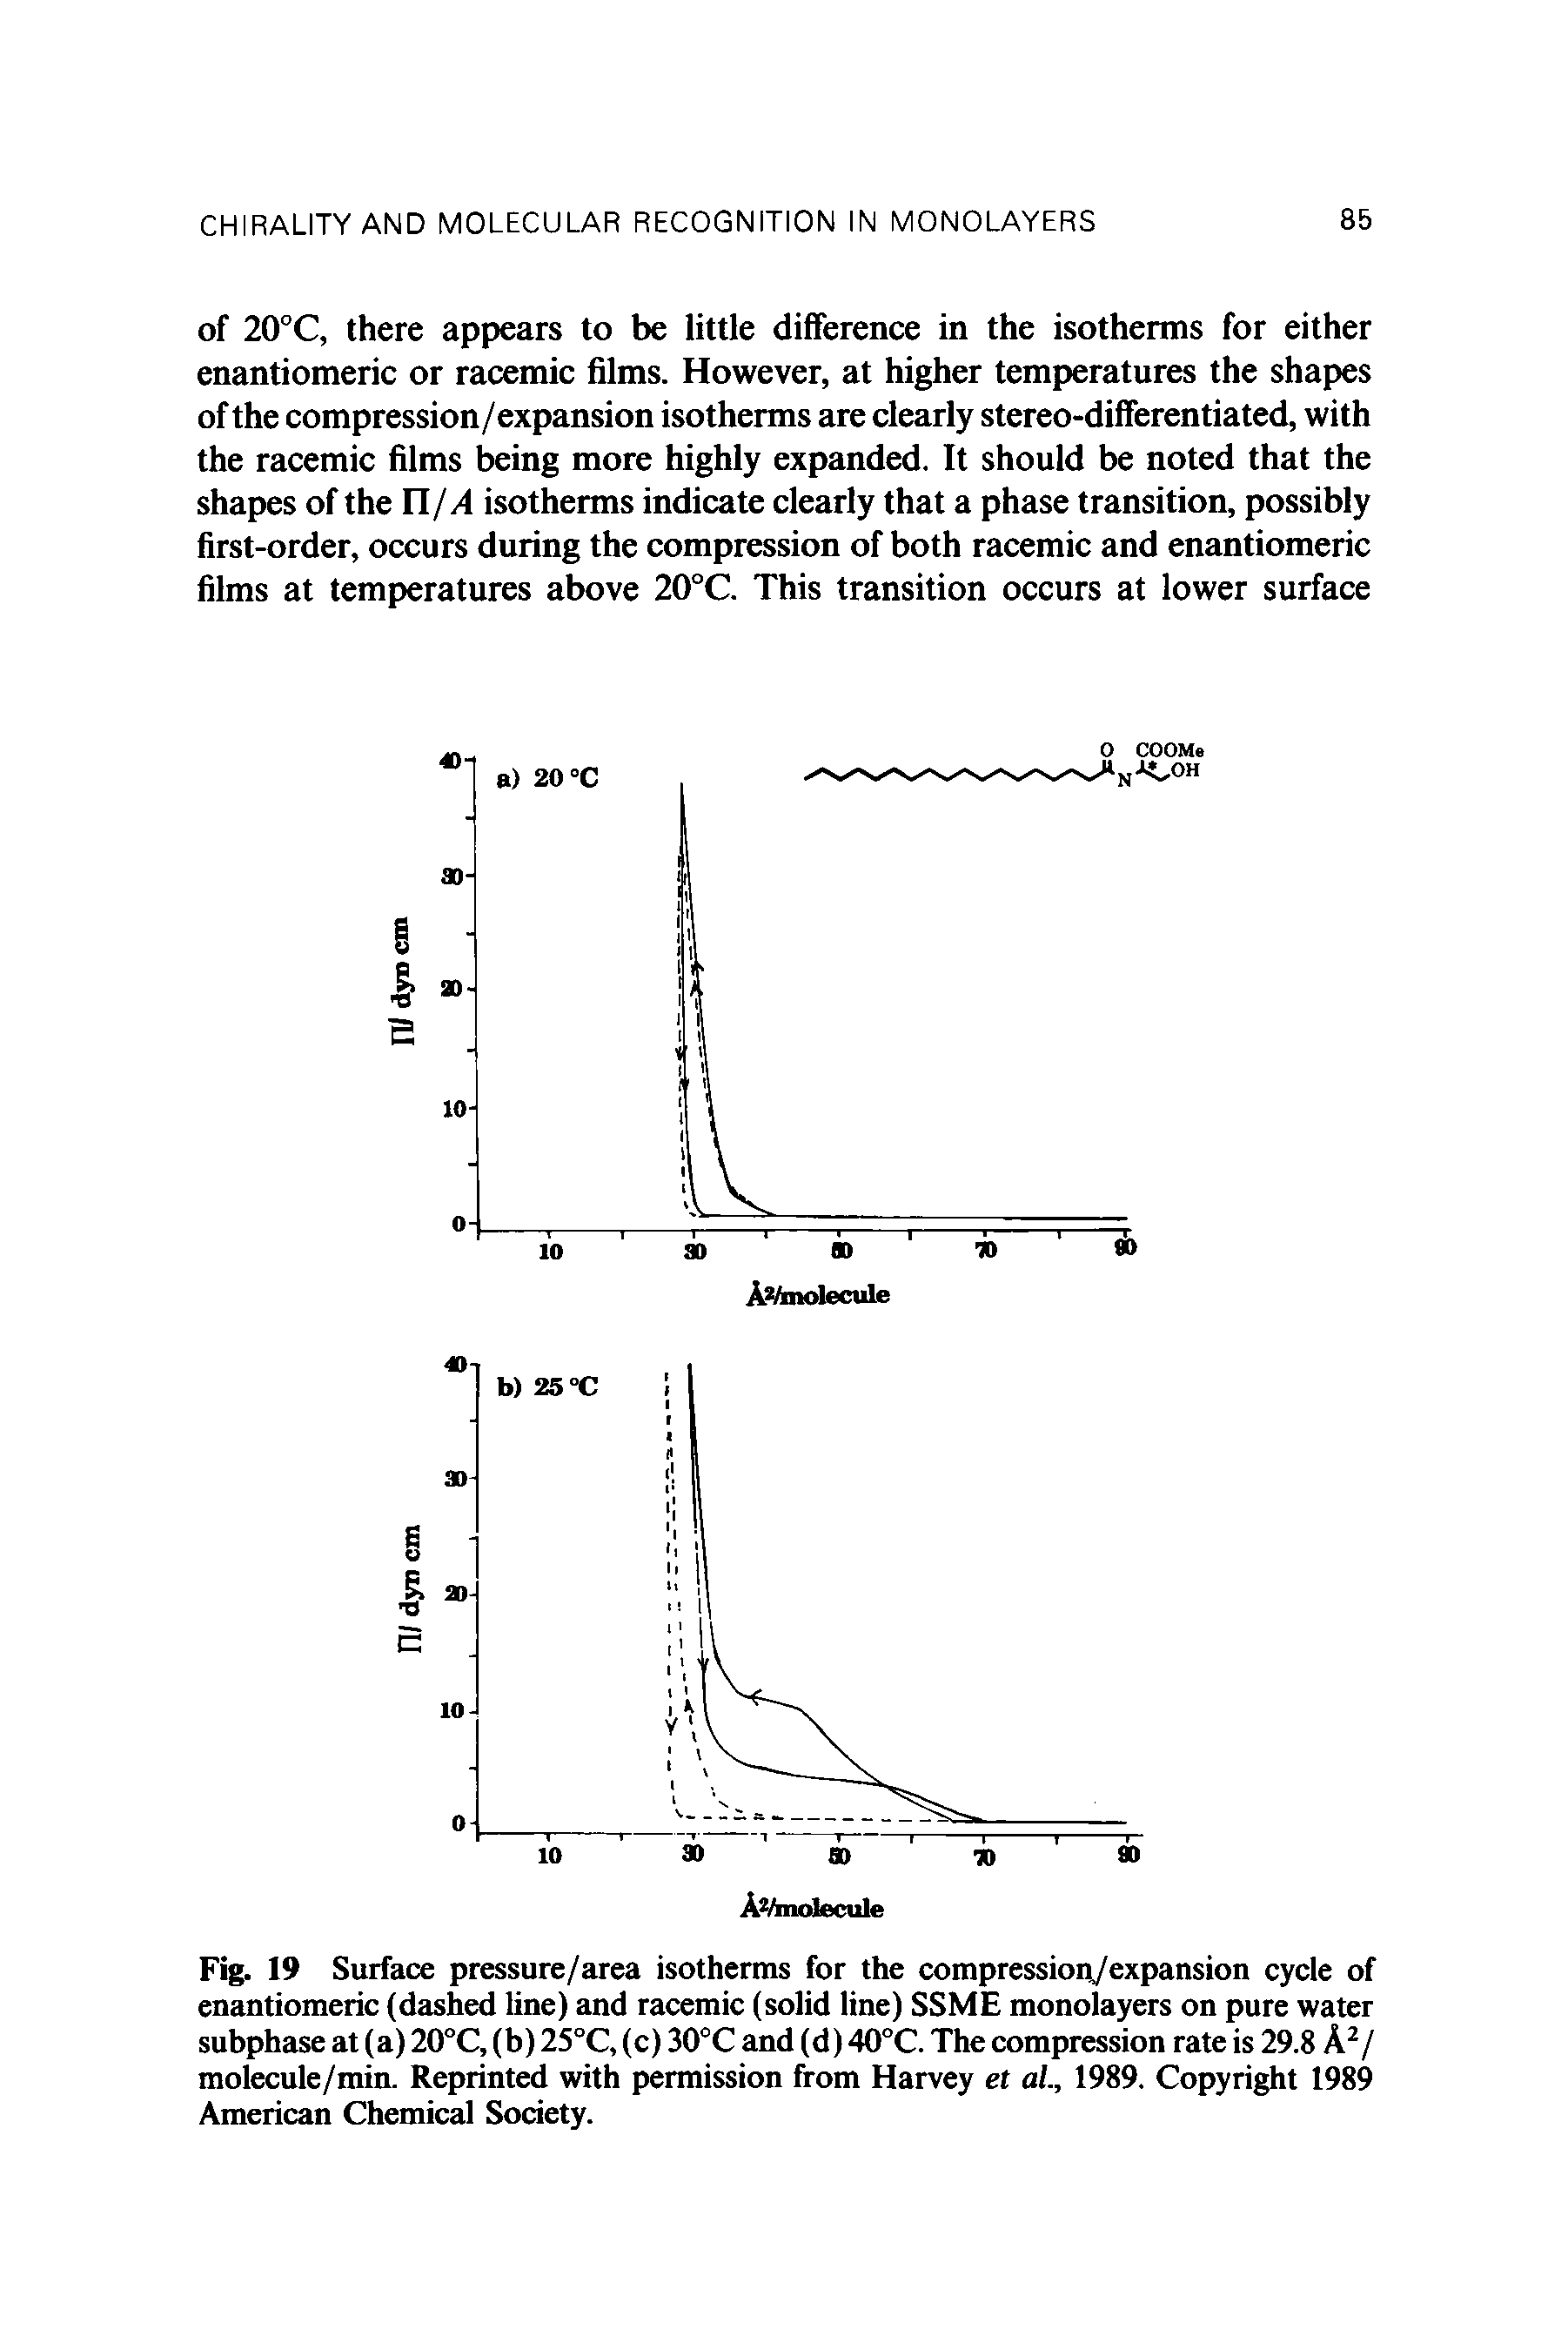 Fig. 19 Surface pressure/area isotherms for the compression/expansion cycle of enantiomeric (dashed line) and racemic (solid line) SSME monolayers on pure water subphase at (a) 20°C, (b) 25°C, (c) 30°C and (d) 40°C. The compression rate is 29.8 A2/ molecule/min. Reprinted with permission from Harvey et al., 1989. Copyright 1989 American Chemical Society.